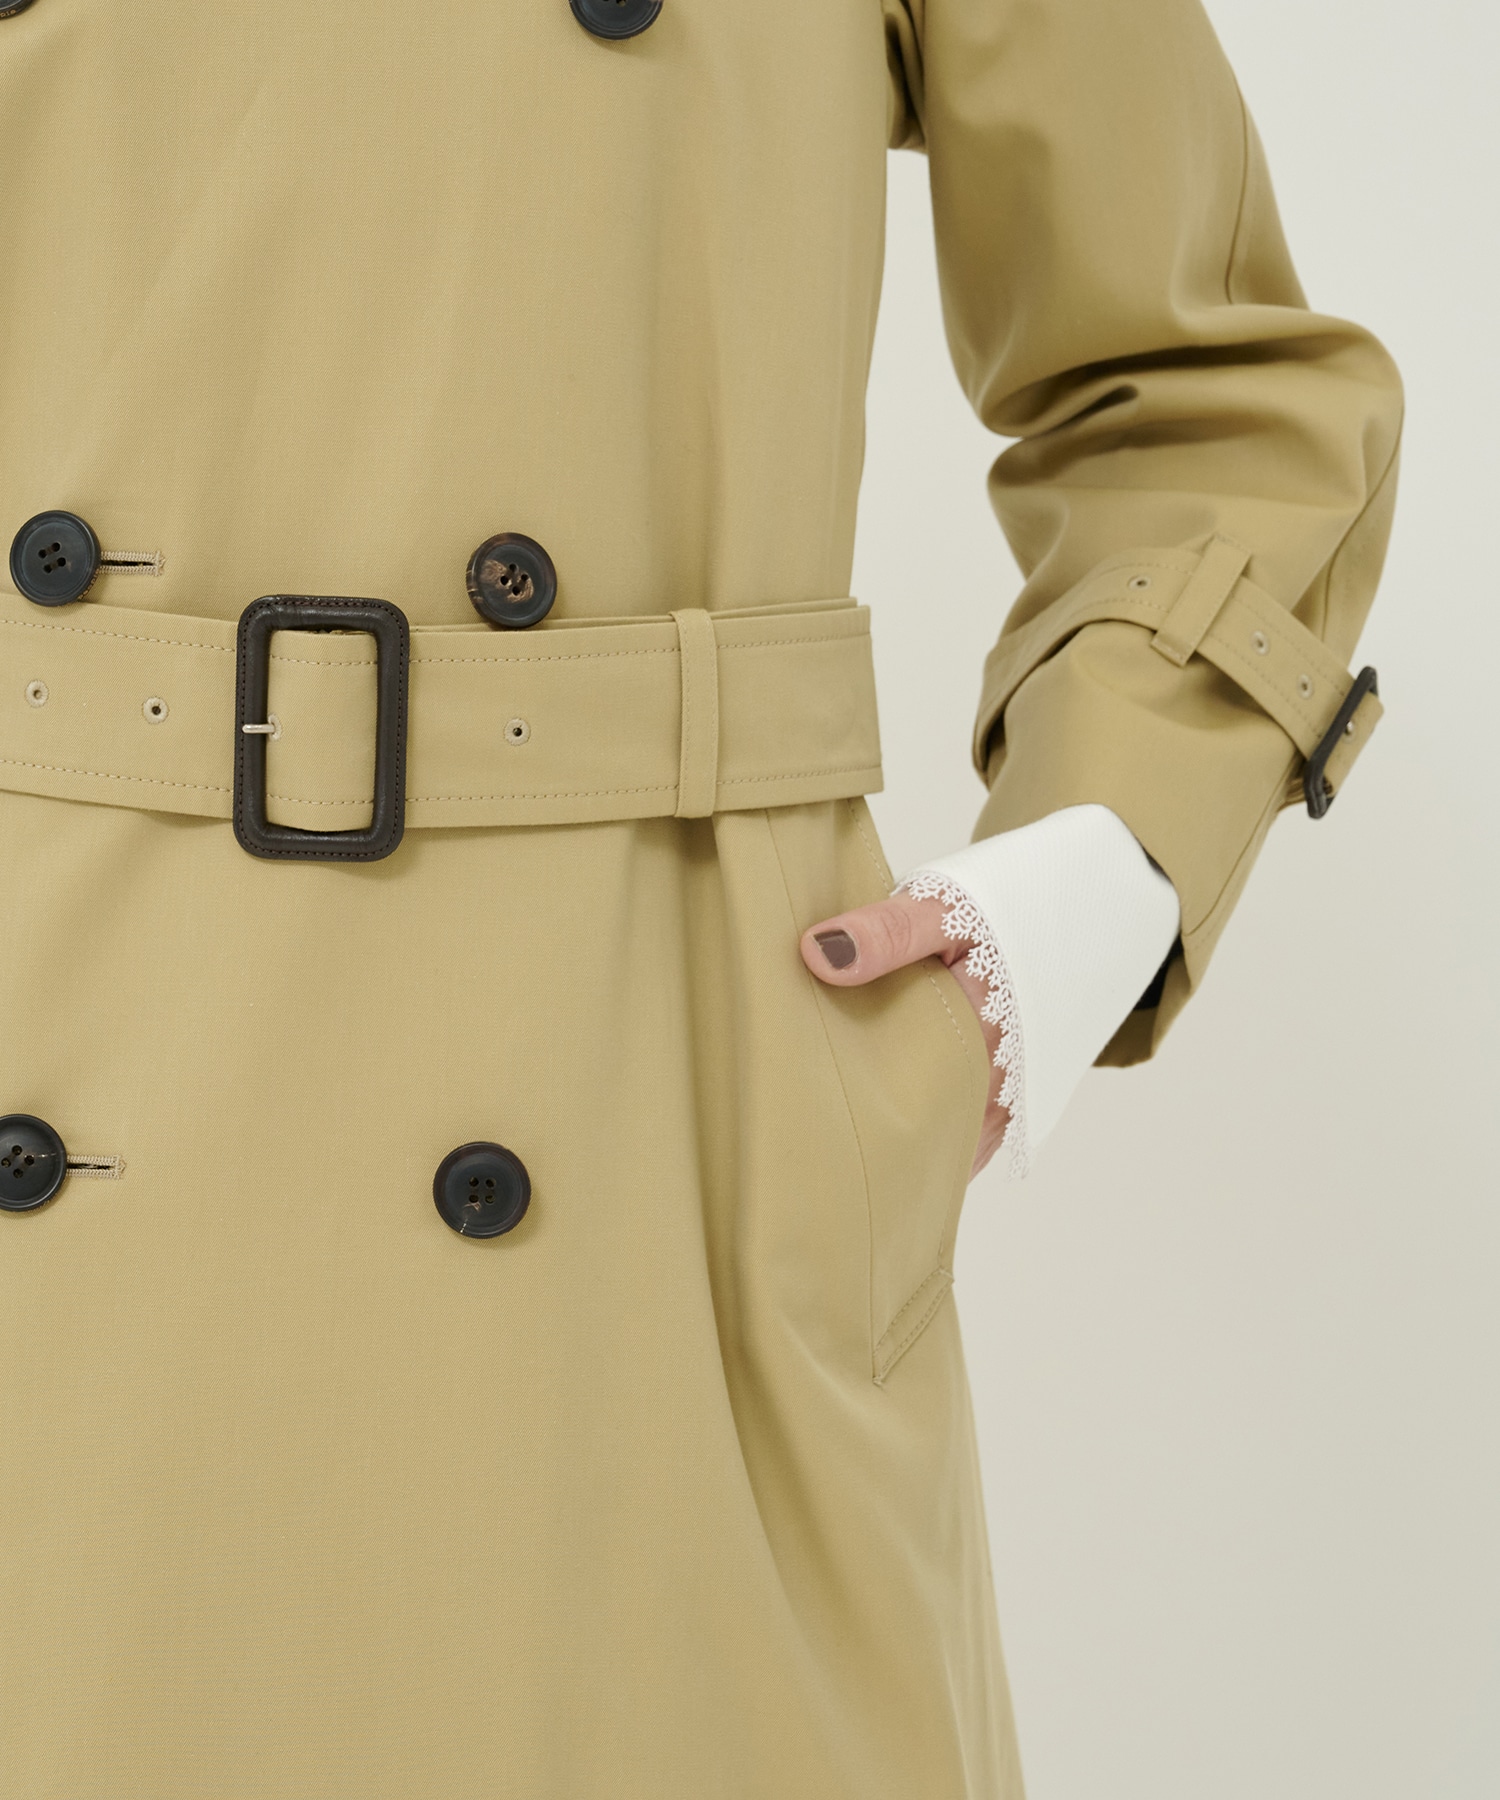 ultimate pima THE / a trench coat(M BEIGE): beautiful people